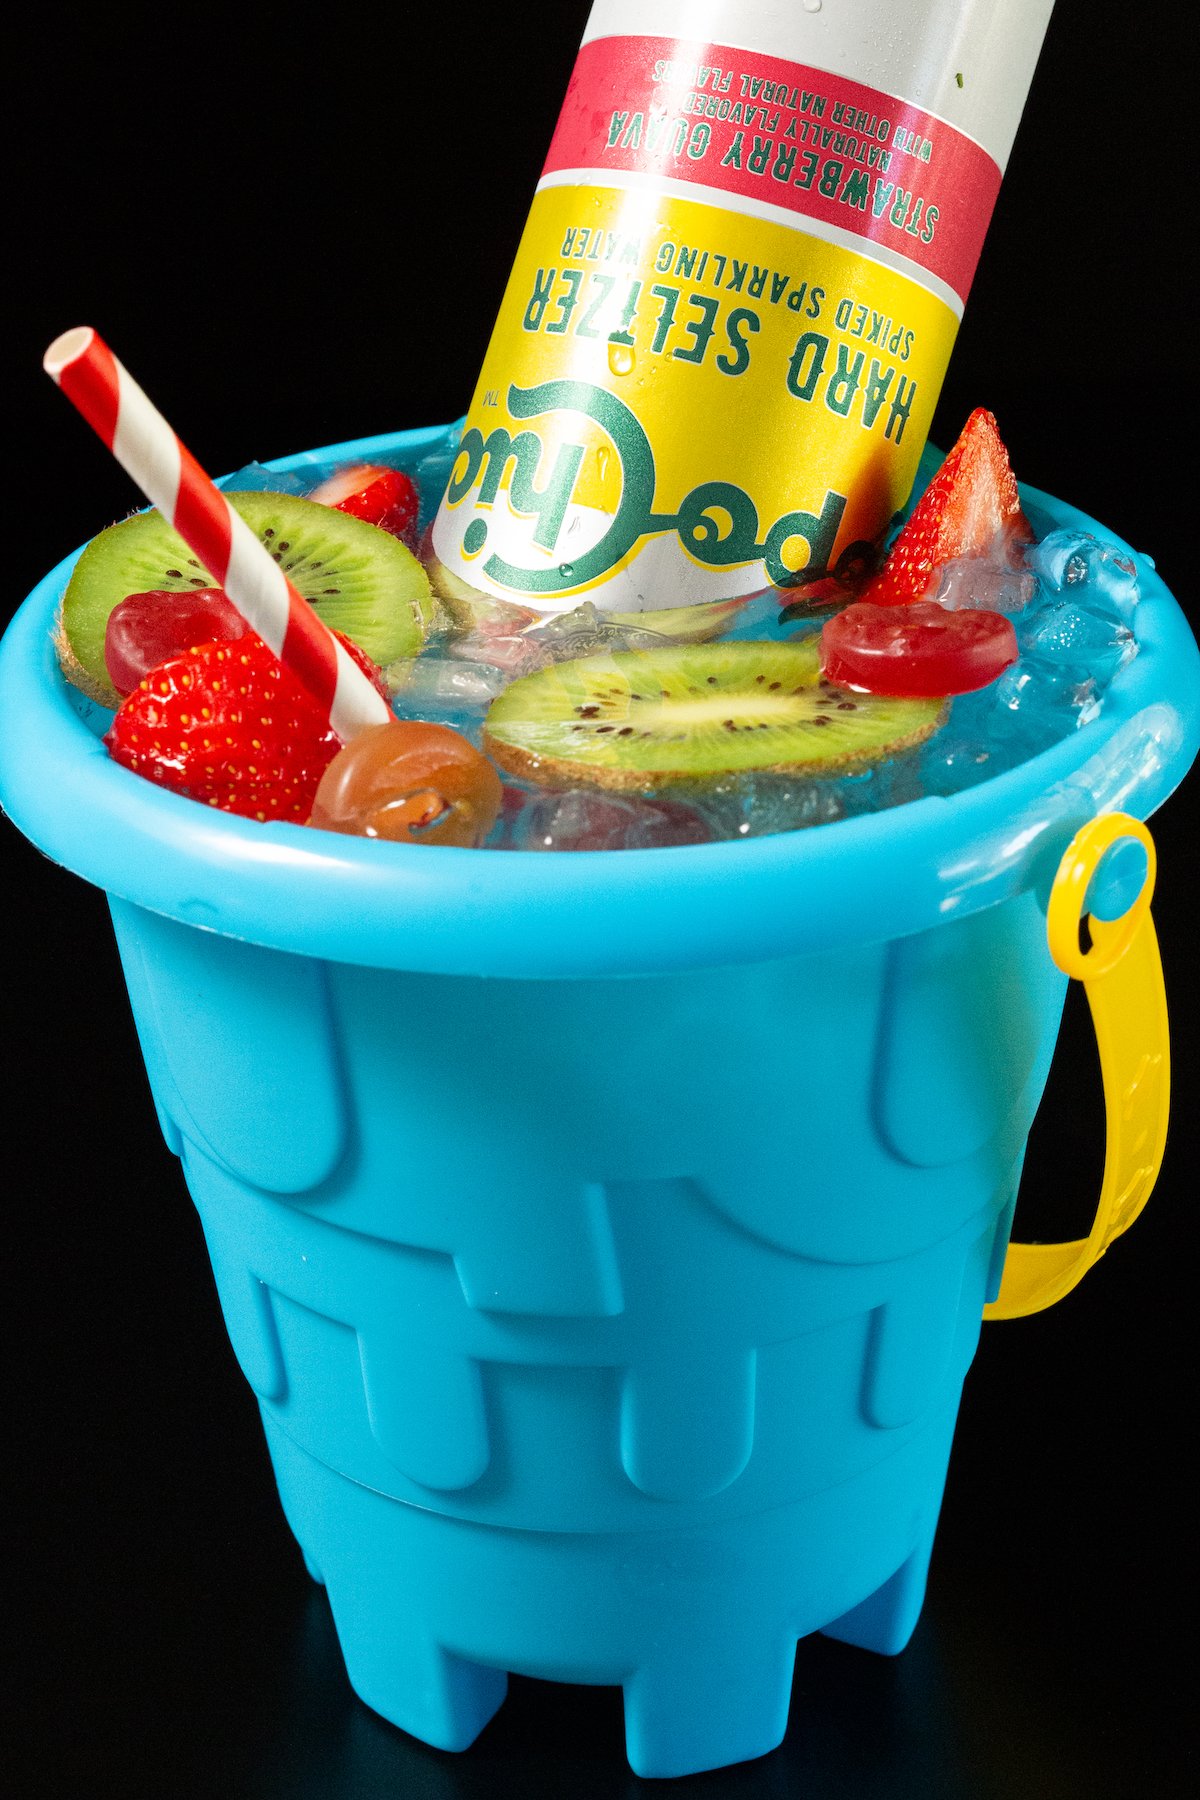 A blue sand bucket filled with a cocktail that's topped with sliced strawberries, kiwis, and gummy lifesavers.